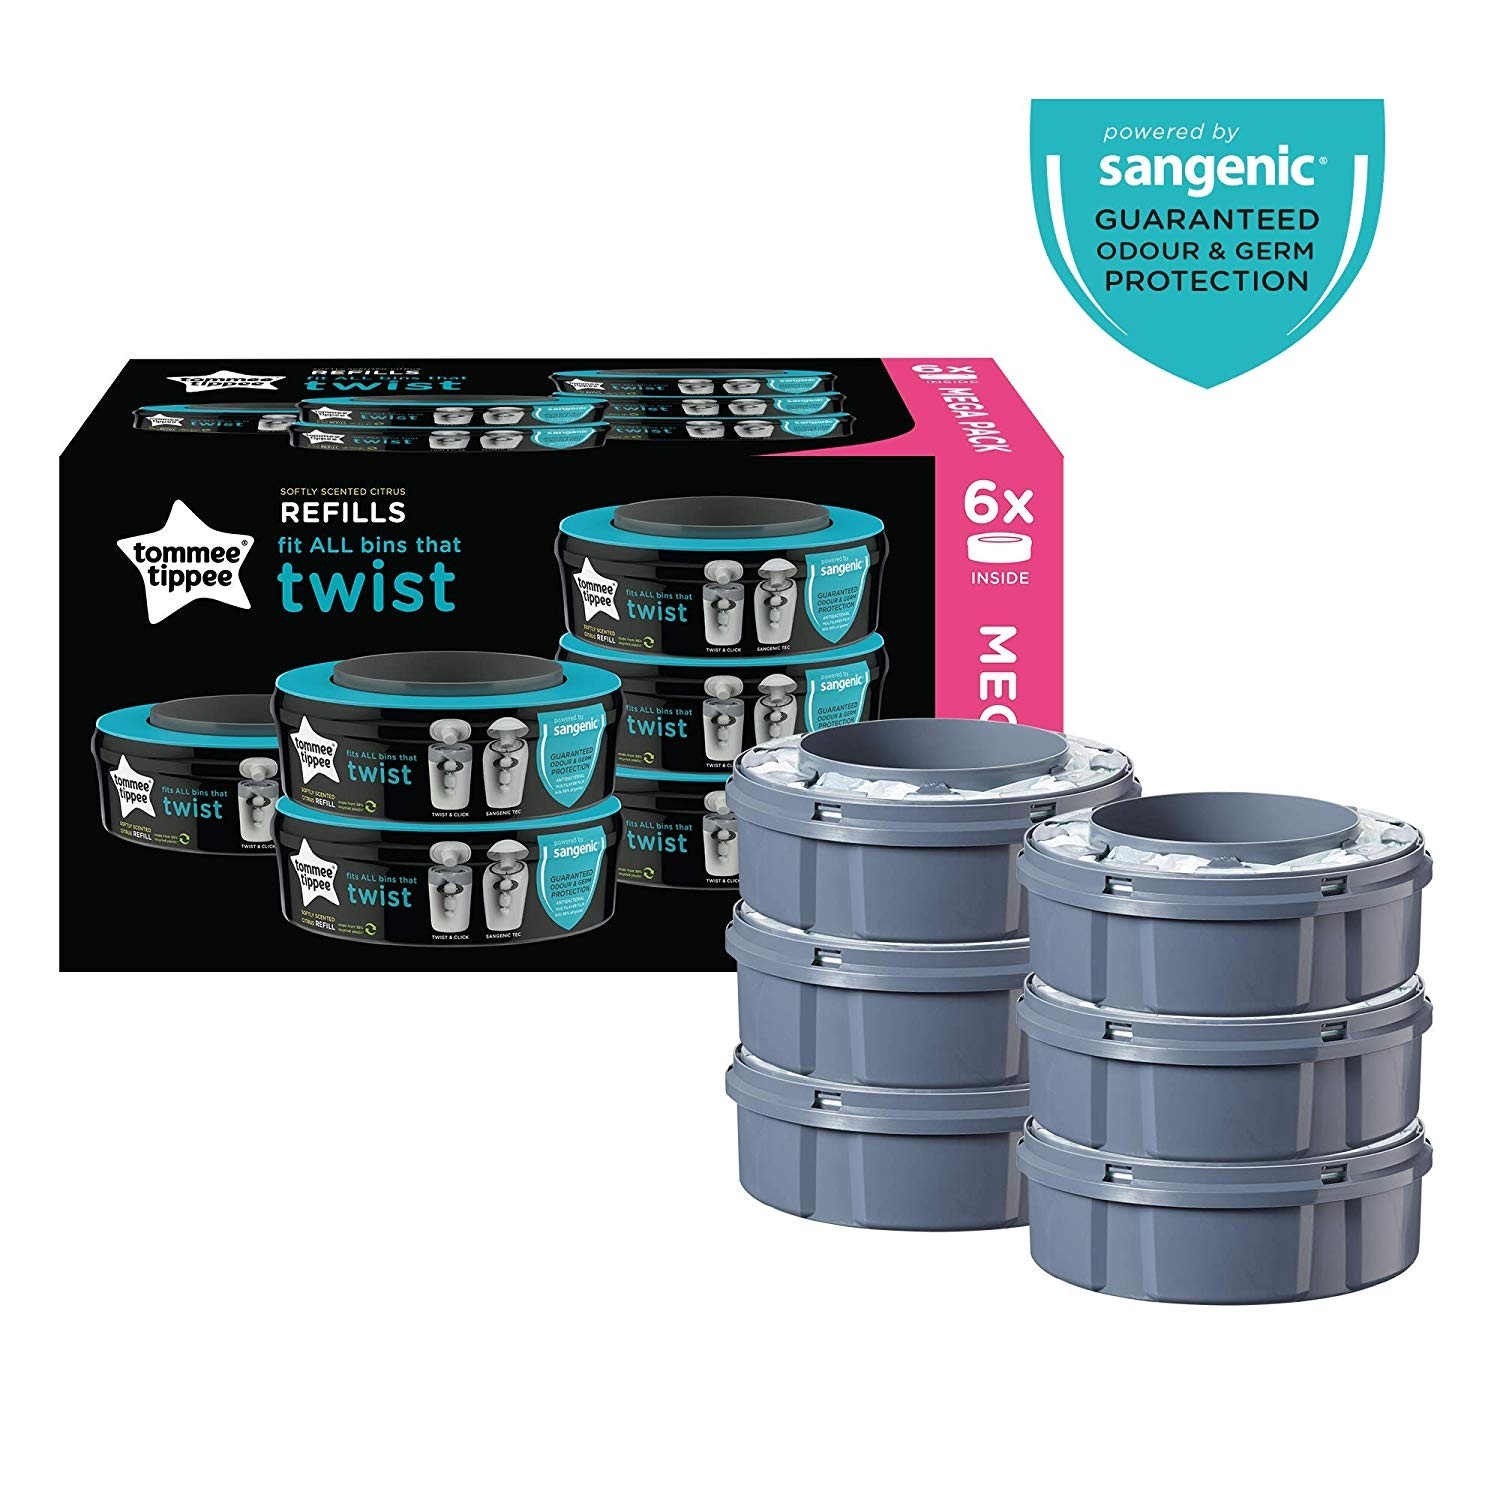 Tommee Tippee Twist and Click Advanced Nappy Disposal Sangenic Tec Refills,  Pack of 6 - (Compatible with Sangenic Tec, Twist and Click Bins) :  : Babyprodukter